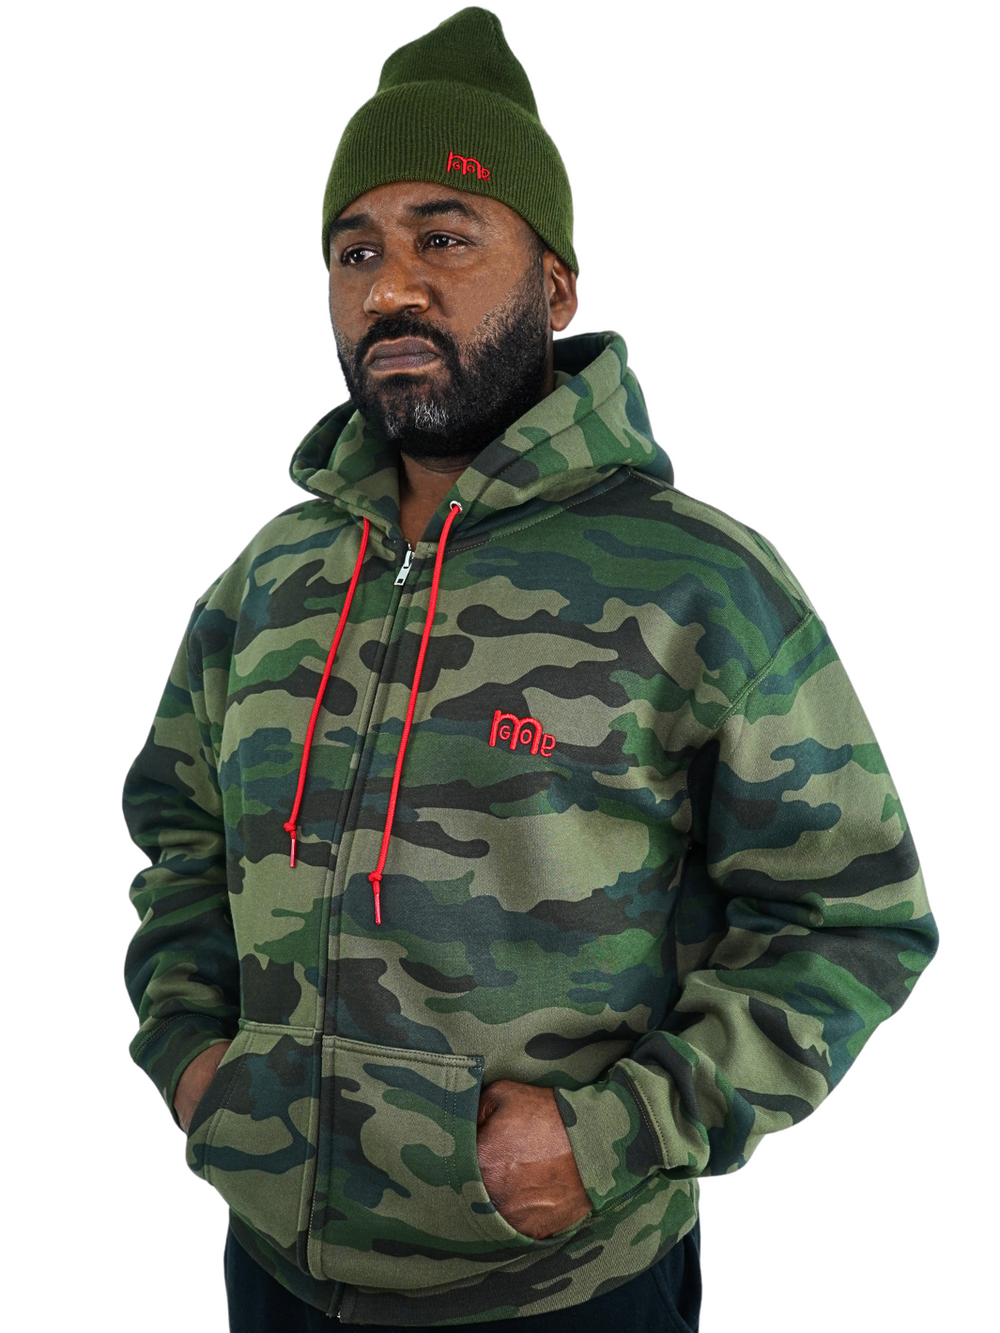 Green Camouflage Full Zip Hoodie with Red drawcord, embroidered GODinme logo at left chest and ROMANS 12 : 21 on hood. Both embroideries are in Red.